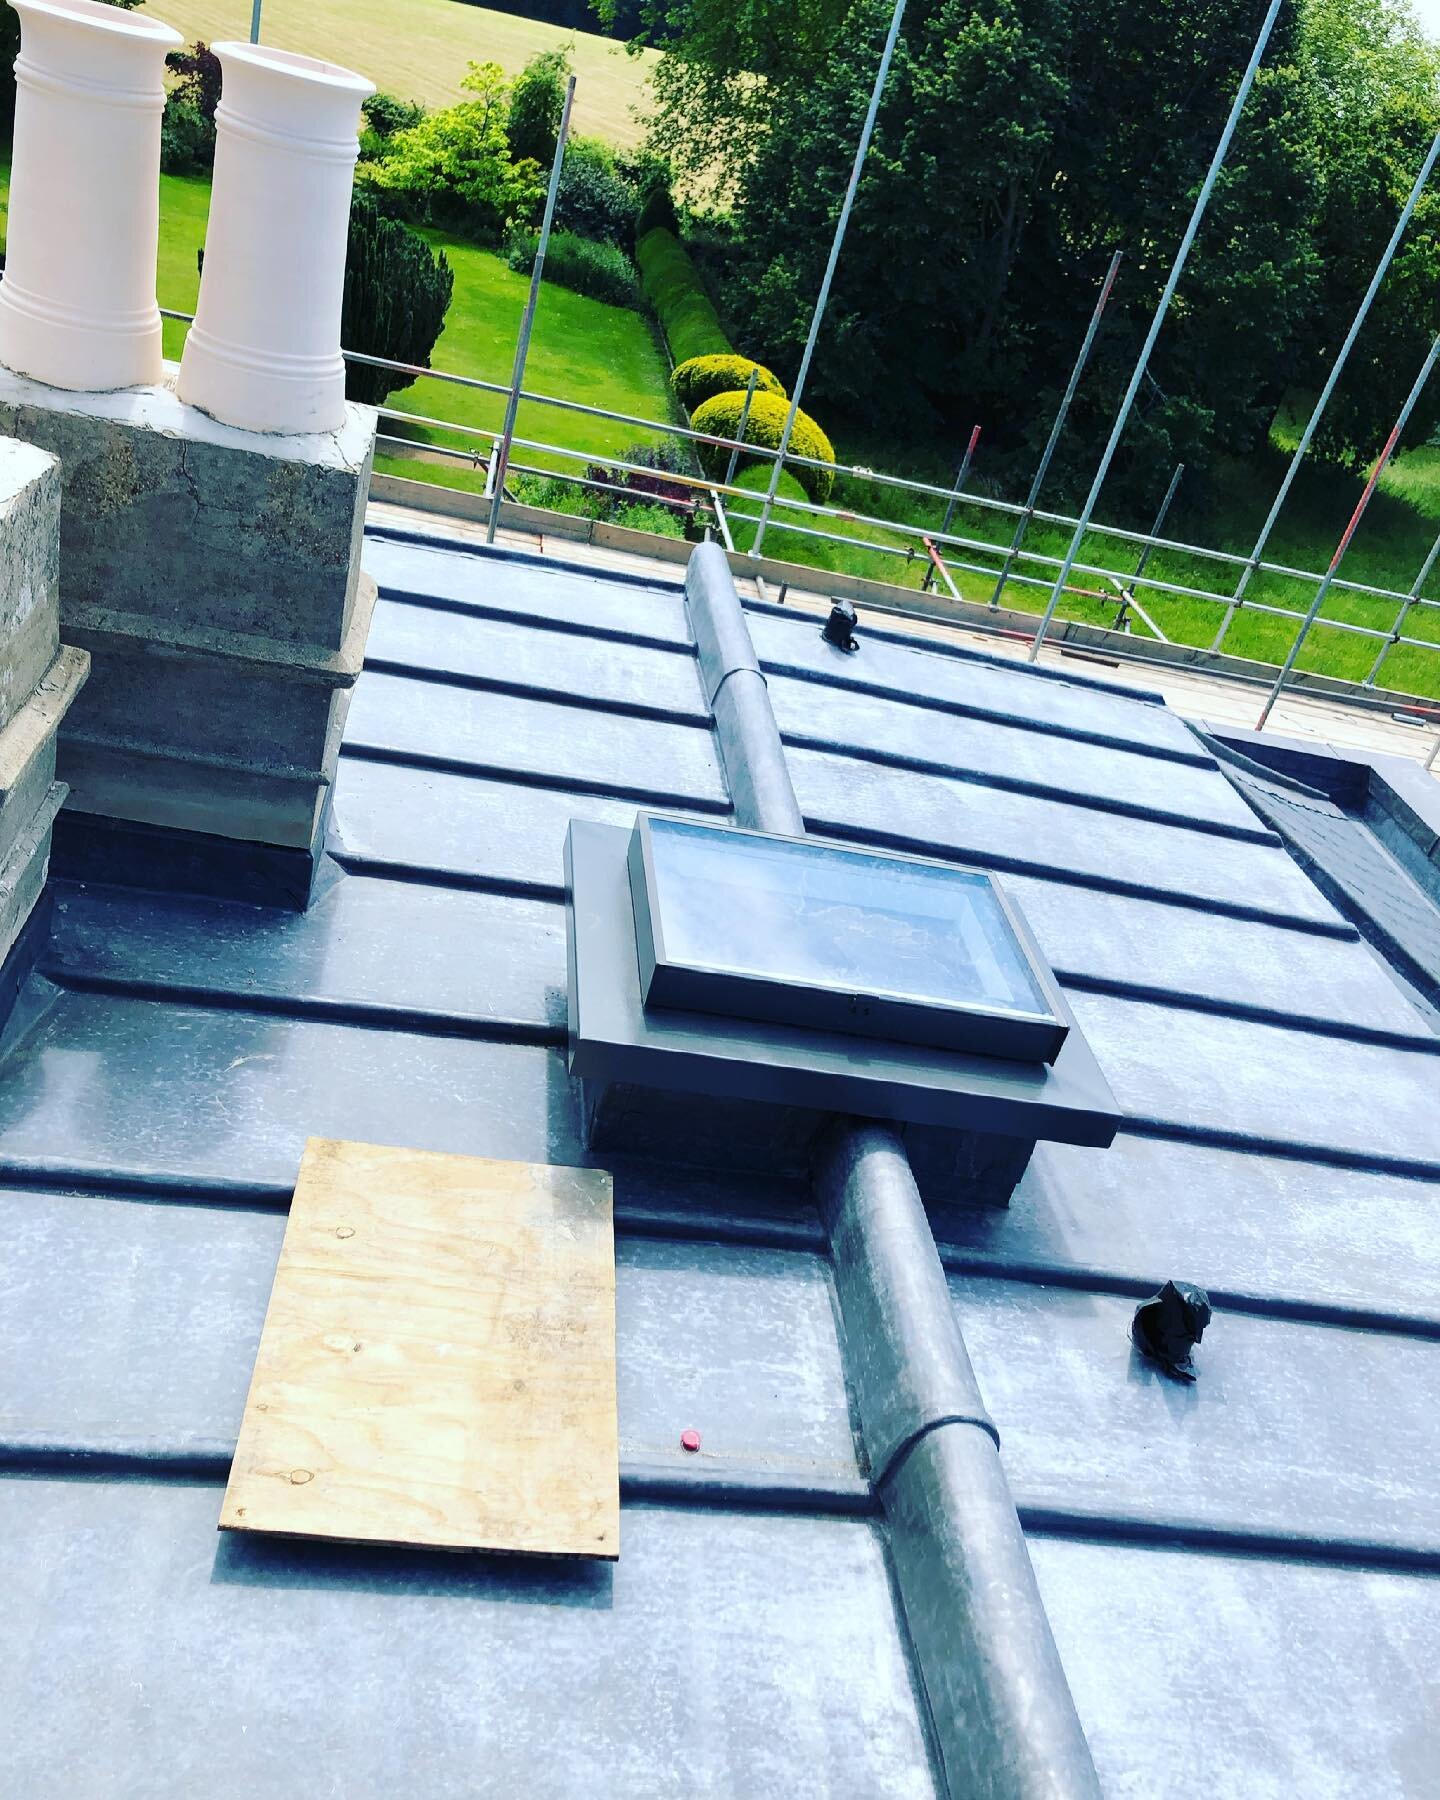 Another section of roof we completed on this beautiful property, with code 7 bays on a welted ridge detail On a continuous strip.
📞07983131947 #leadwork  #leadroofingspecialists  #leadroofing #leadwelding #heritage #heritageroofing #listedbuilding #